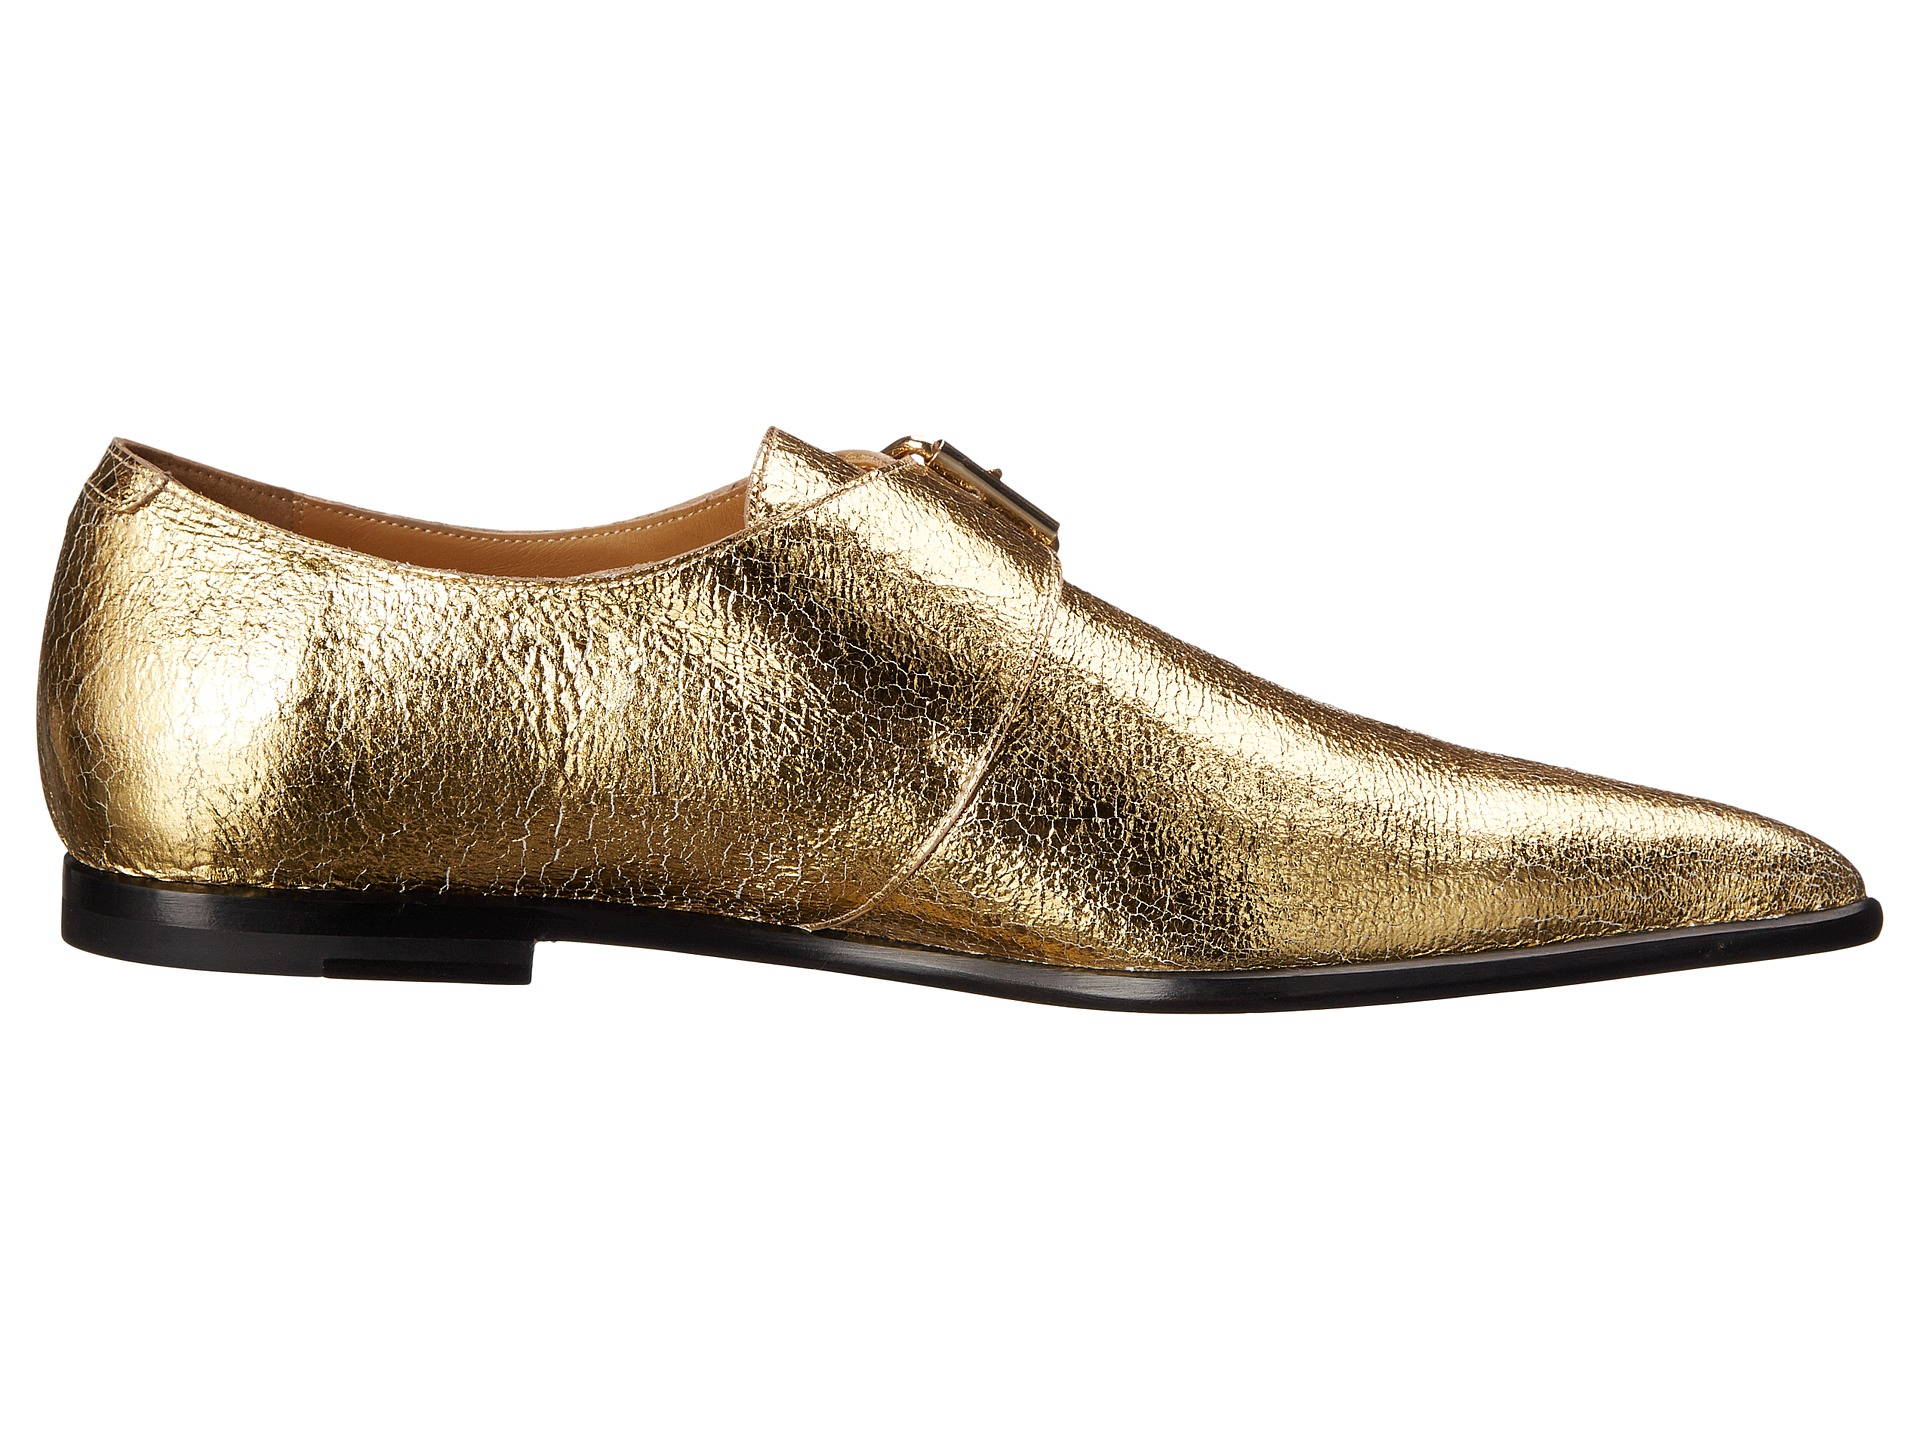 Vivienne Westwood Carnaby Buckle Shoe Gold - Zappos.com Free Shipping ...